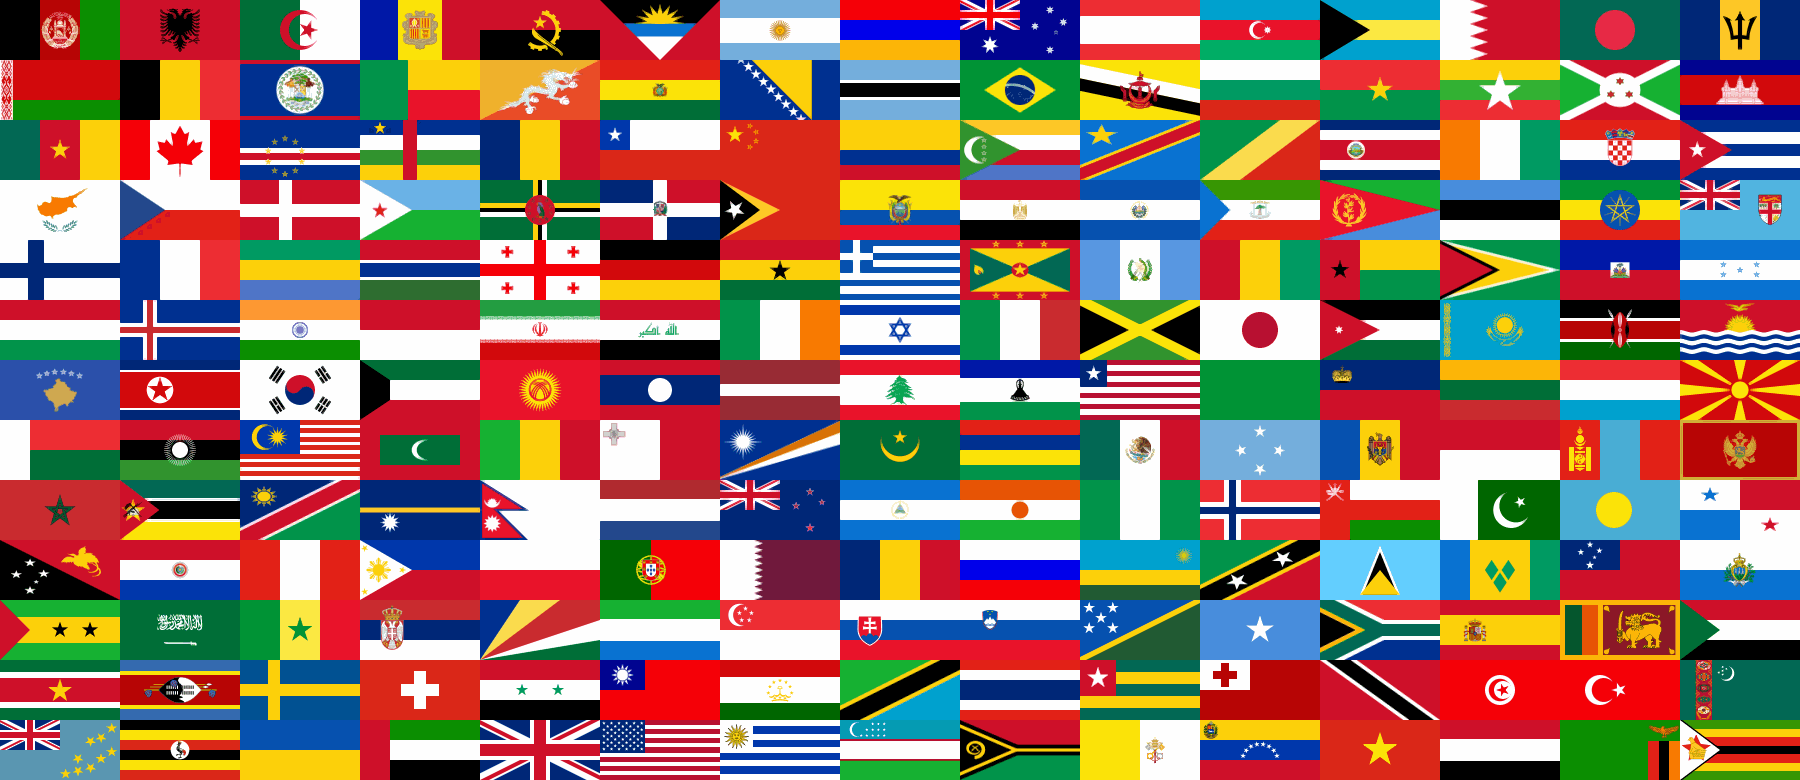 national-flags-of-different-countries-discount-online-save-52